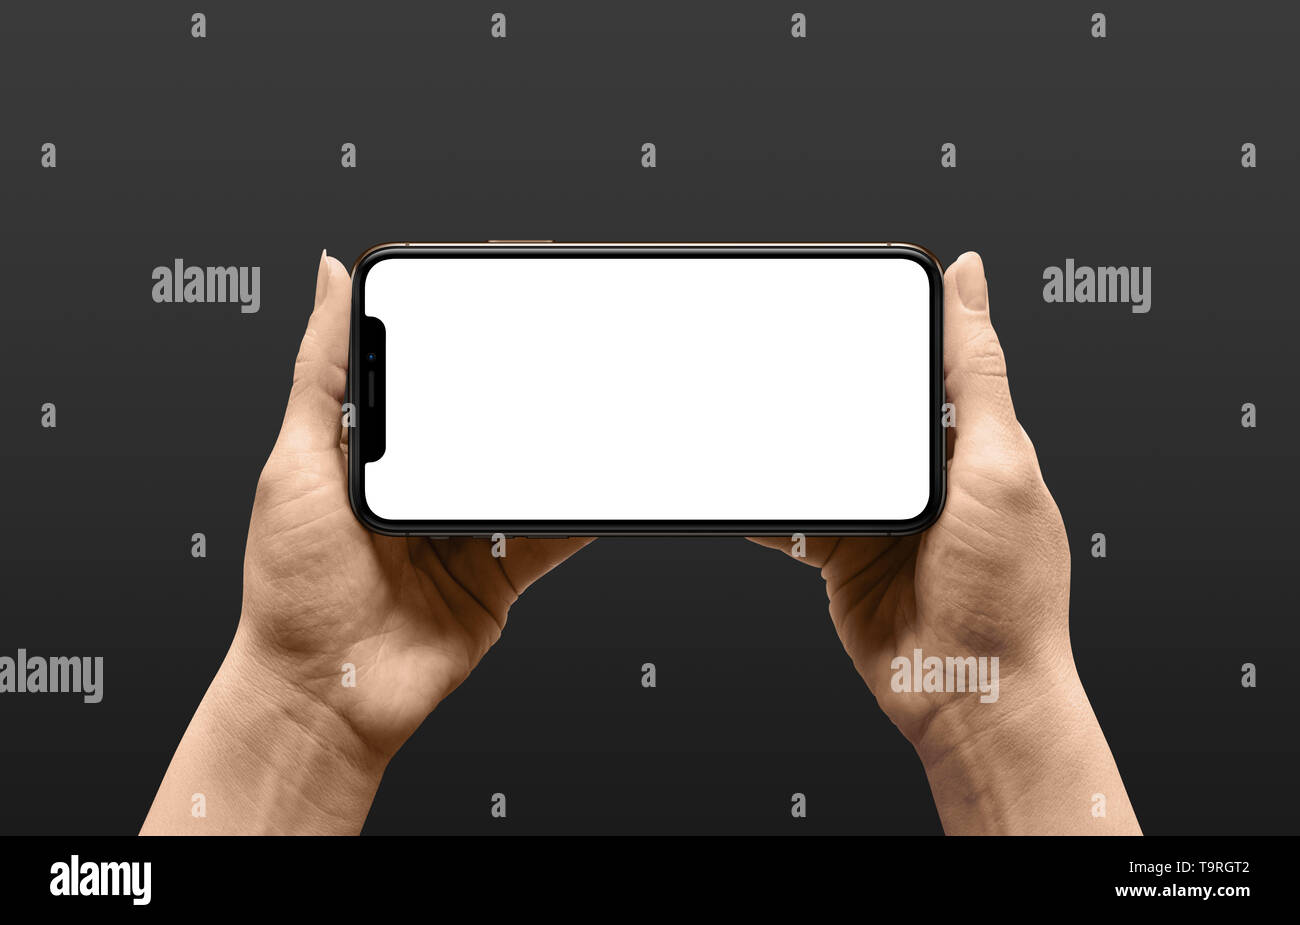 Modern smart phone with round, thin edges and under display camera in woman hands in horizontal position. Black background. Stock Photo